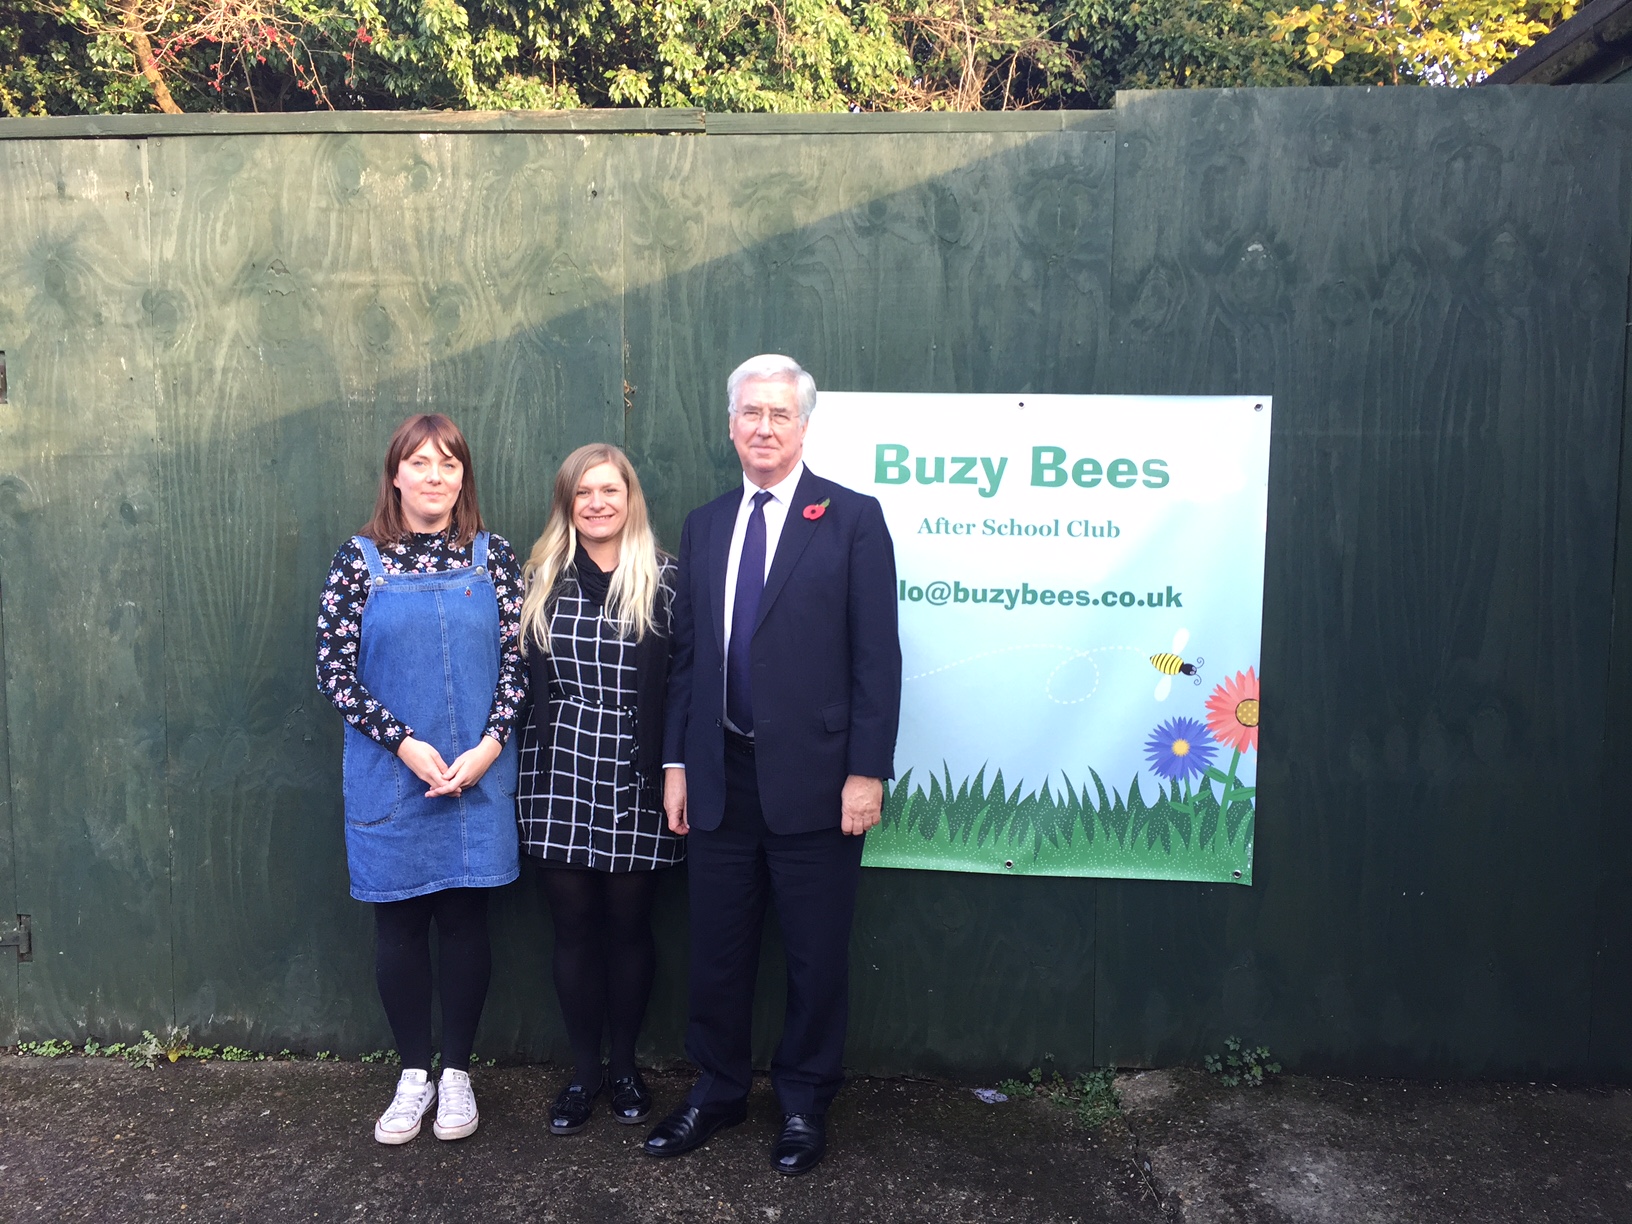 Michael with Vicky and Somerset, Manager and Deputy Manager at Buzy Bees.